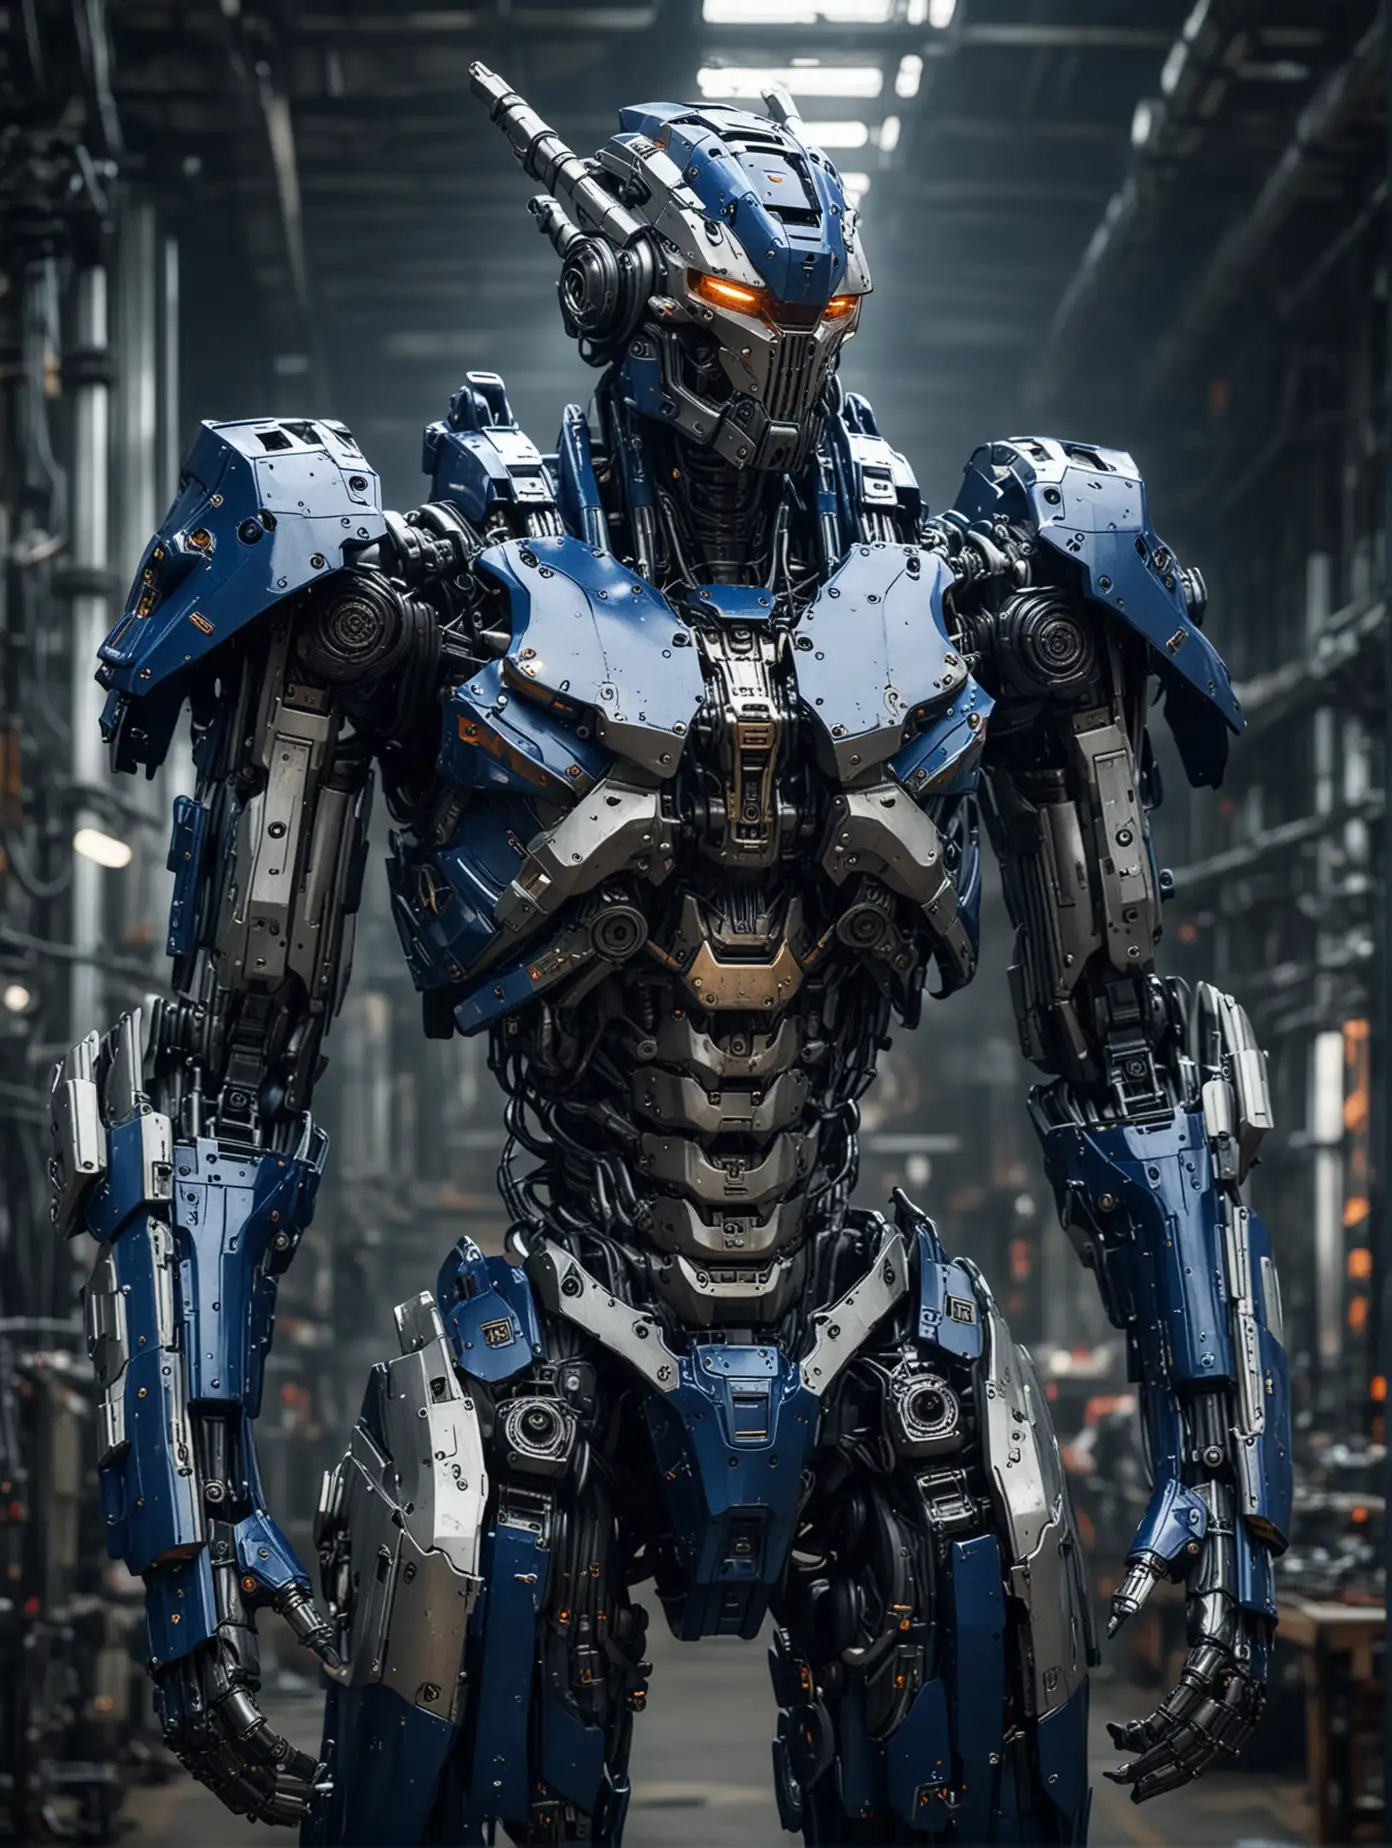 Gigantic Dark Blue and Silver Mech Suit in Cyberpunk Factory Setting